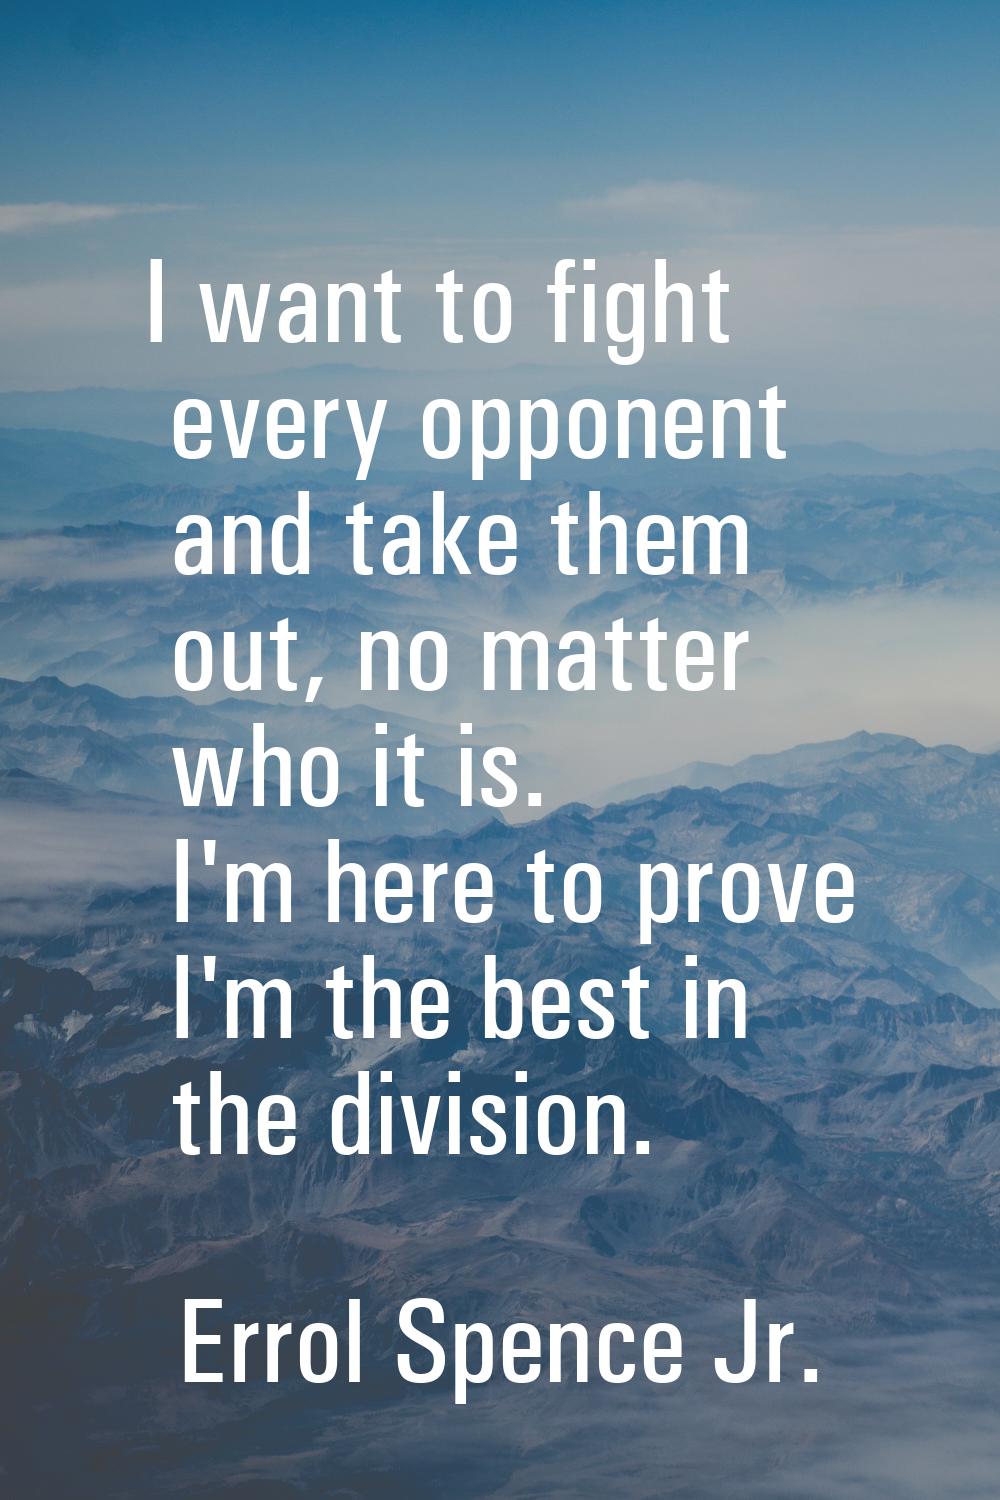 I want to fight every opponent and take them out, no matter who it is. I'm here to prove I'm the be